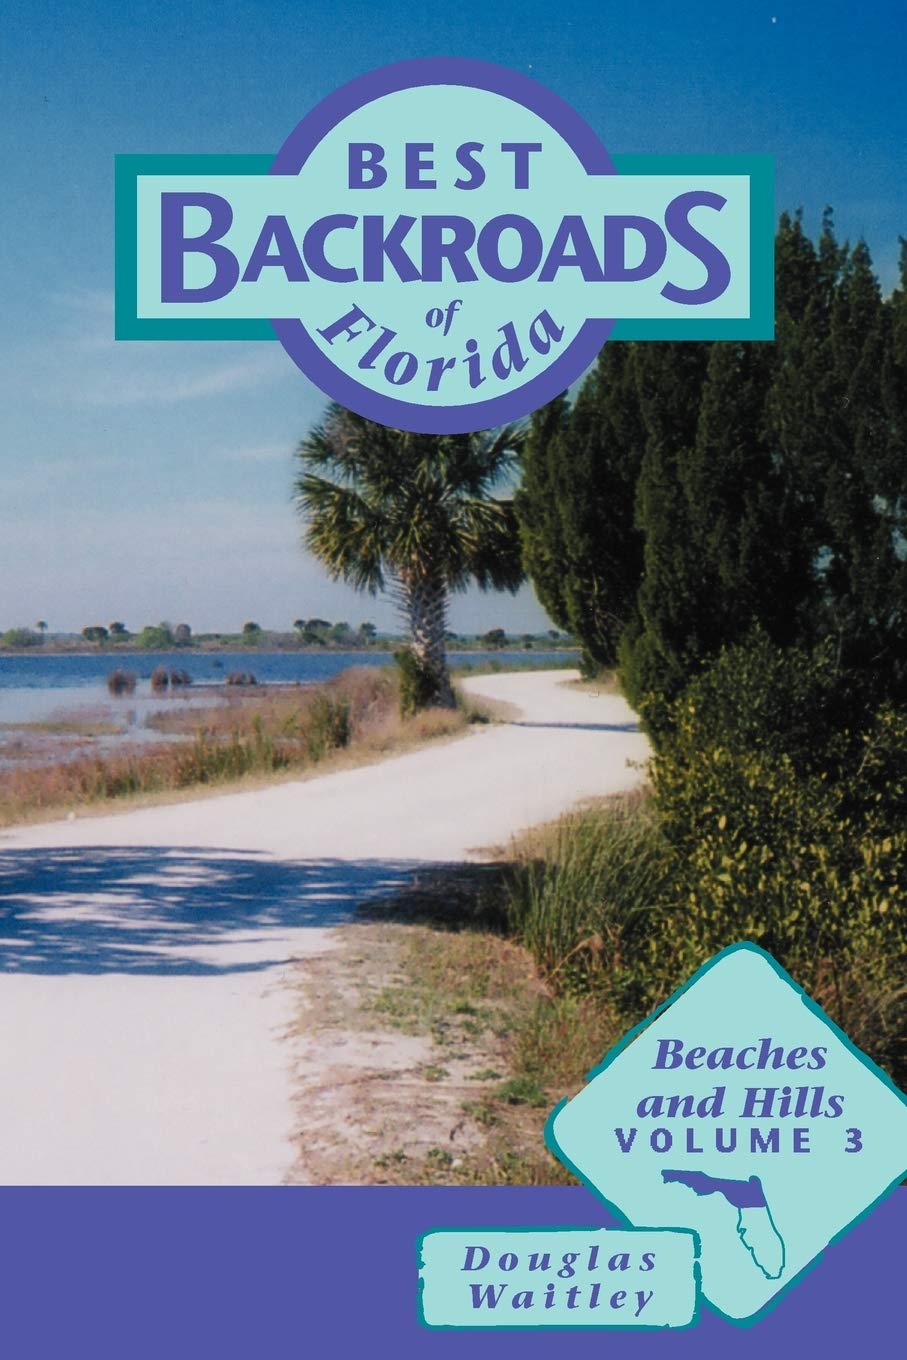 Best Backroads of Florida: Beaches and Hills